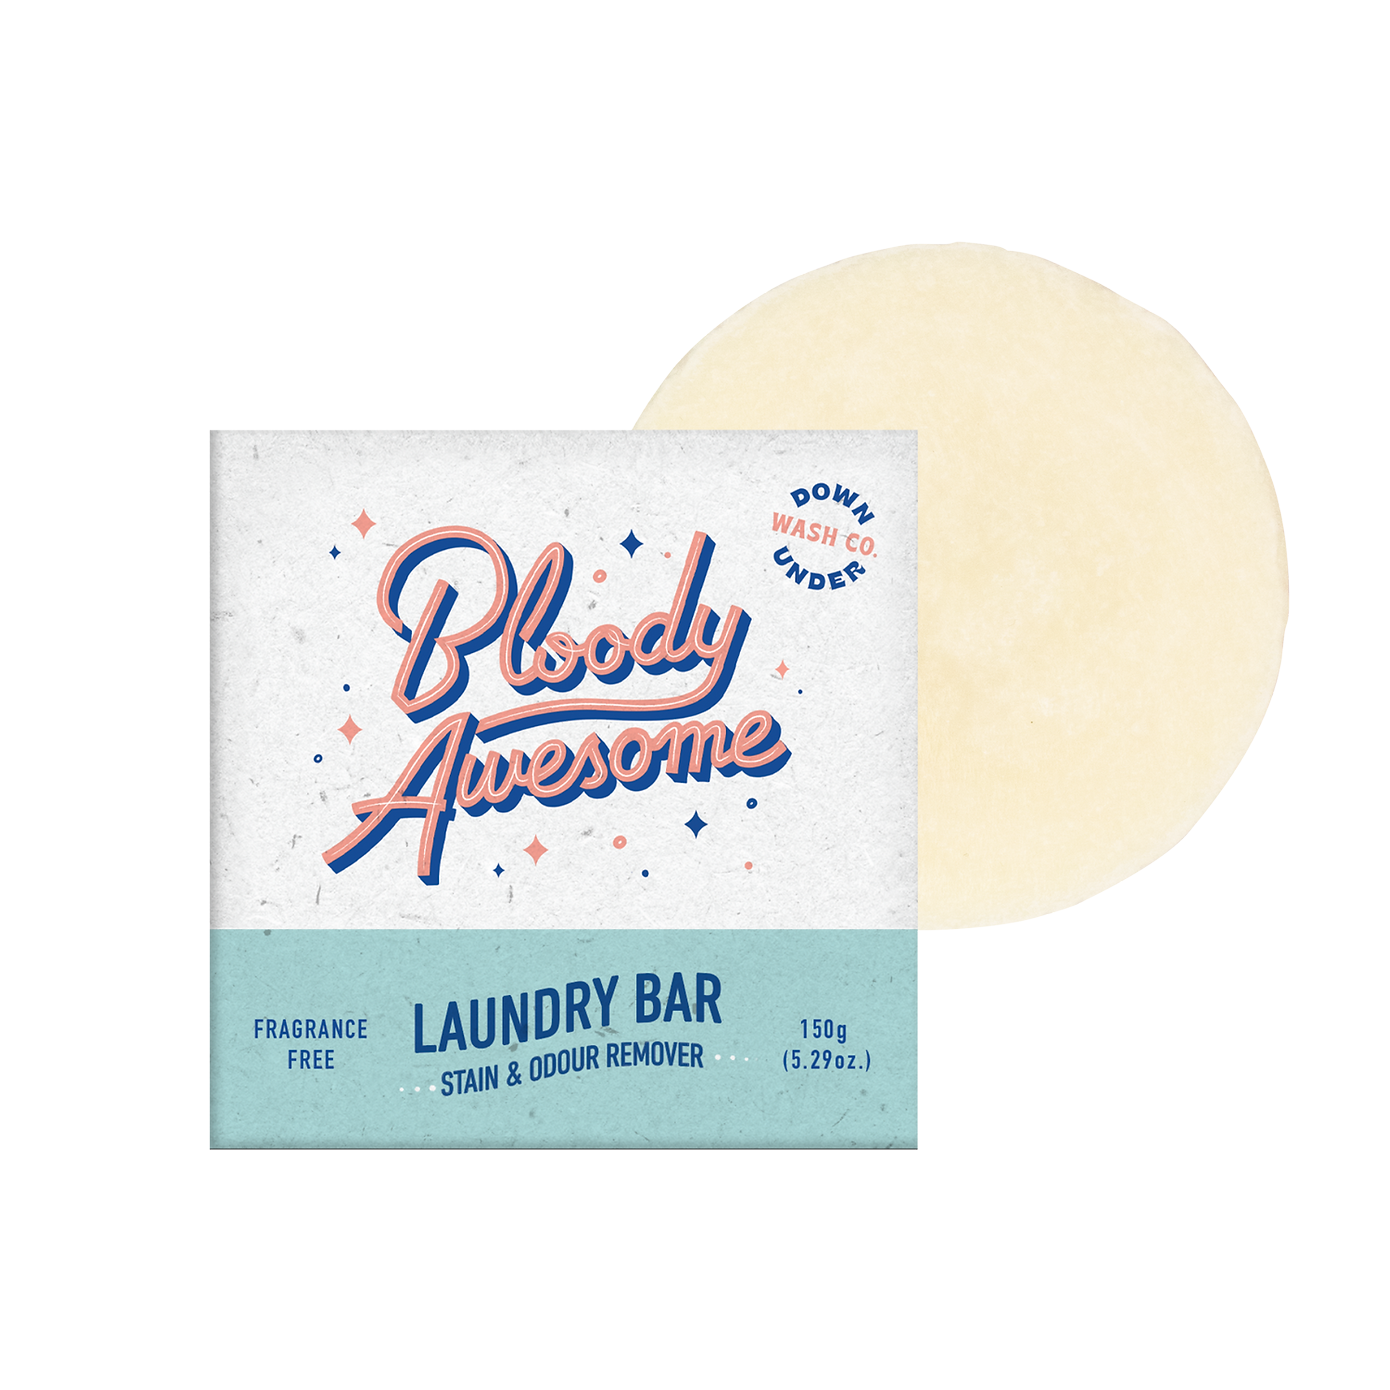 Downunder Wash Co Laundry Bar Stain & Odour Remover 150g, Fragrance Free